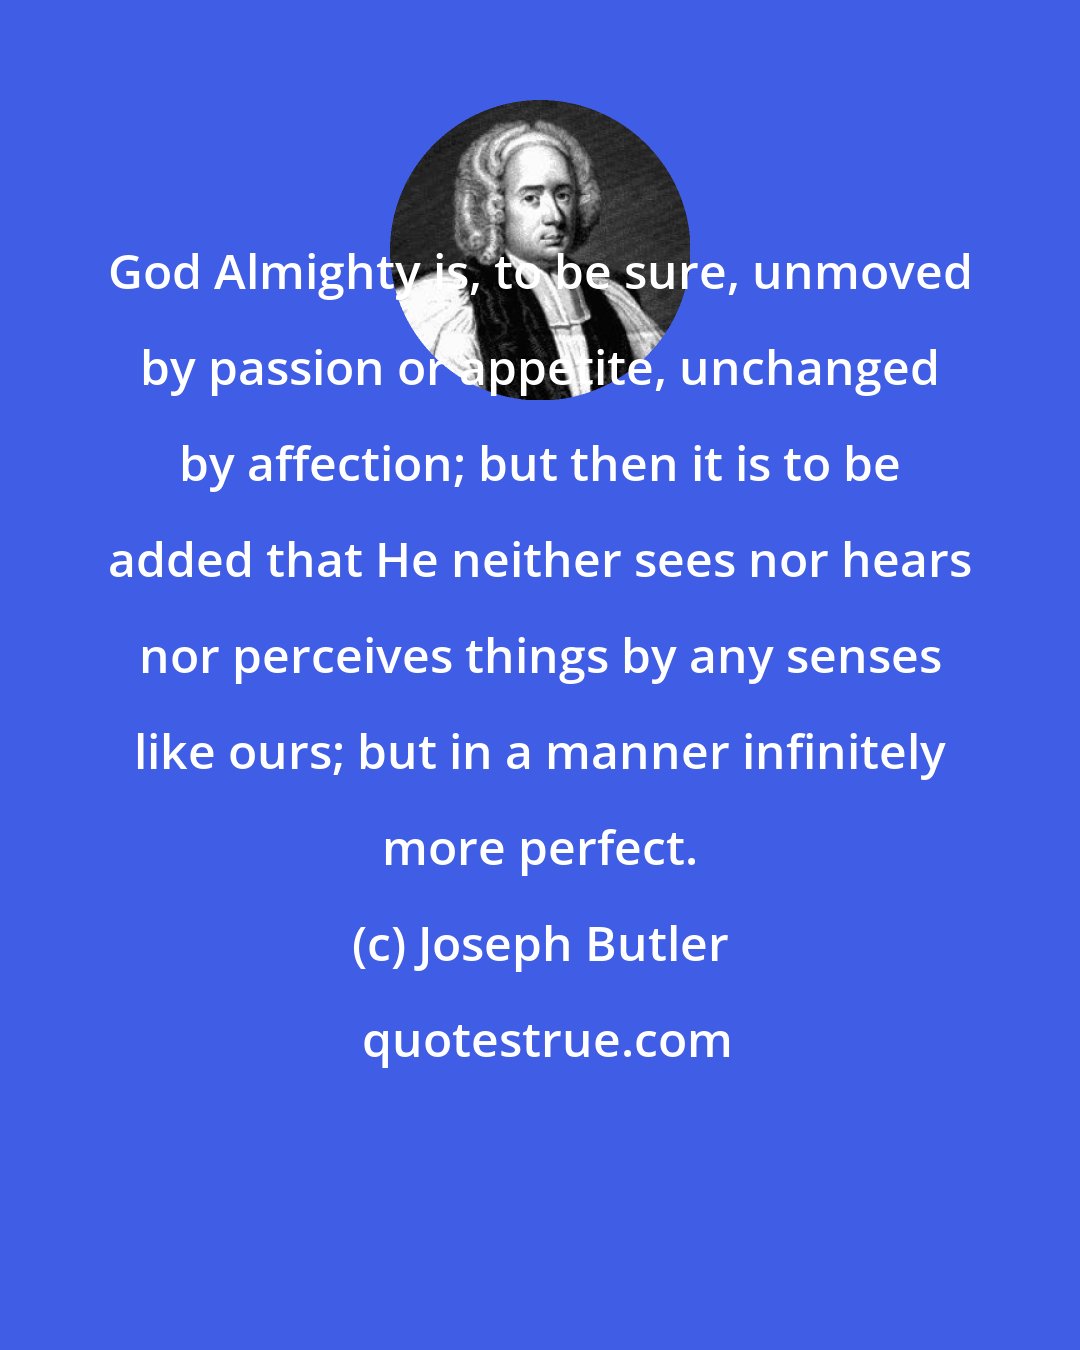 Joseph Butler: God Almighty is, to be sure, unmoved by passion or appetite, unchanged by affection; but then it is to be added that He neither sees nor hears nor perceives things by any senses like ours; but in a manner infinitely more perfect.